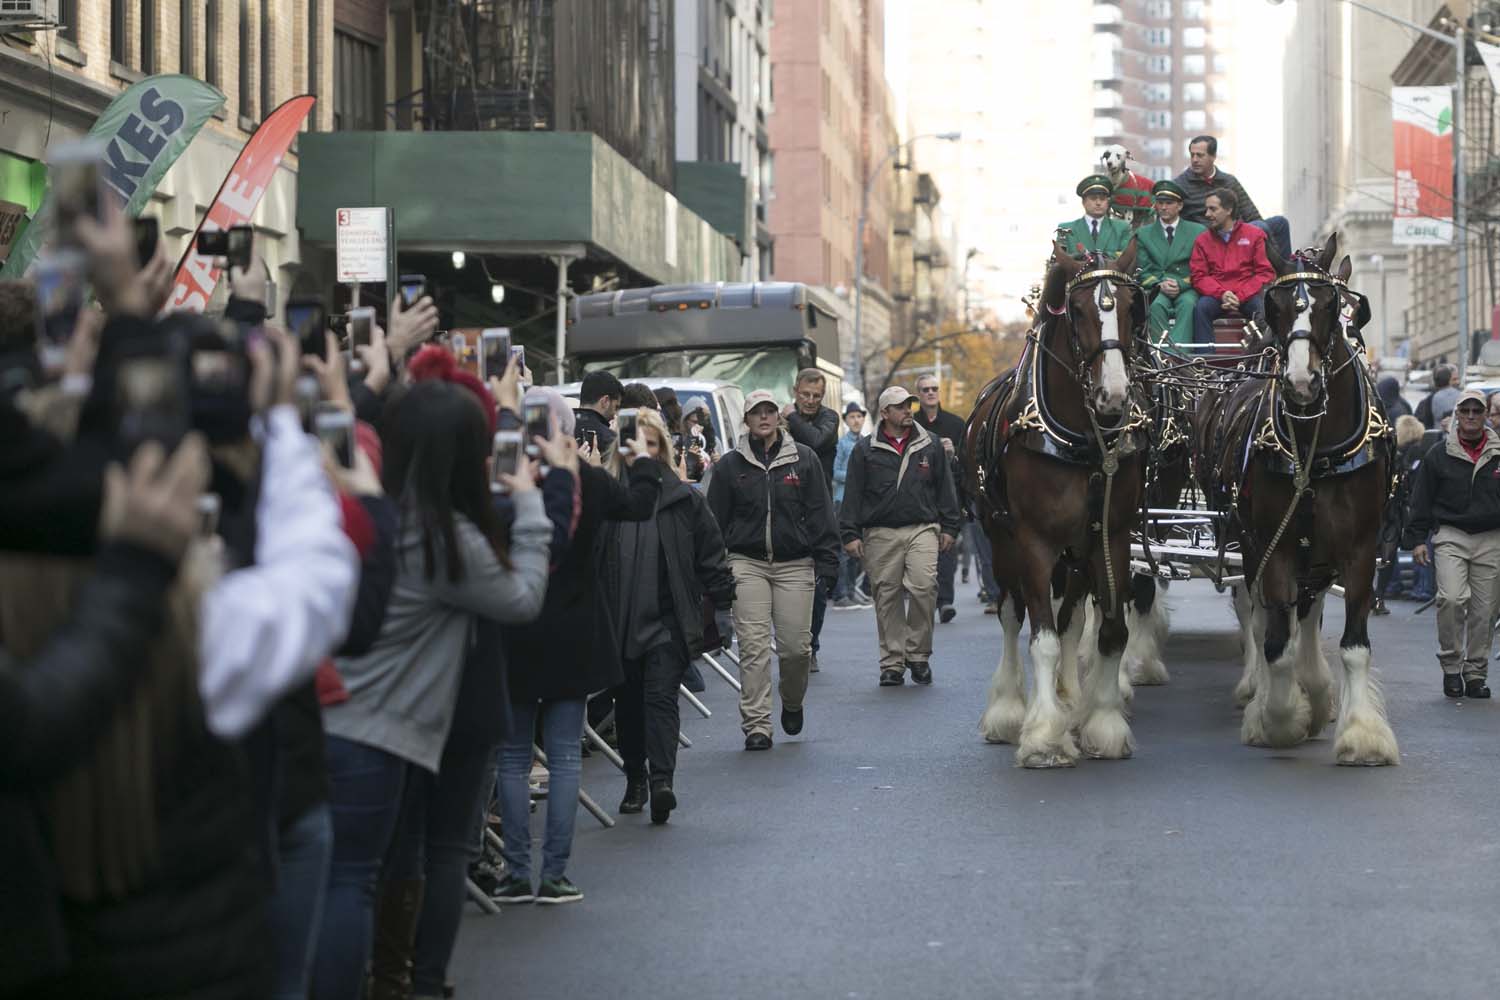 Anheuser-Busch Celebrates New NYC Office Opening with Historic Beer Delivery Reenactment